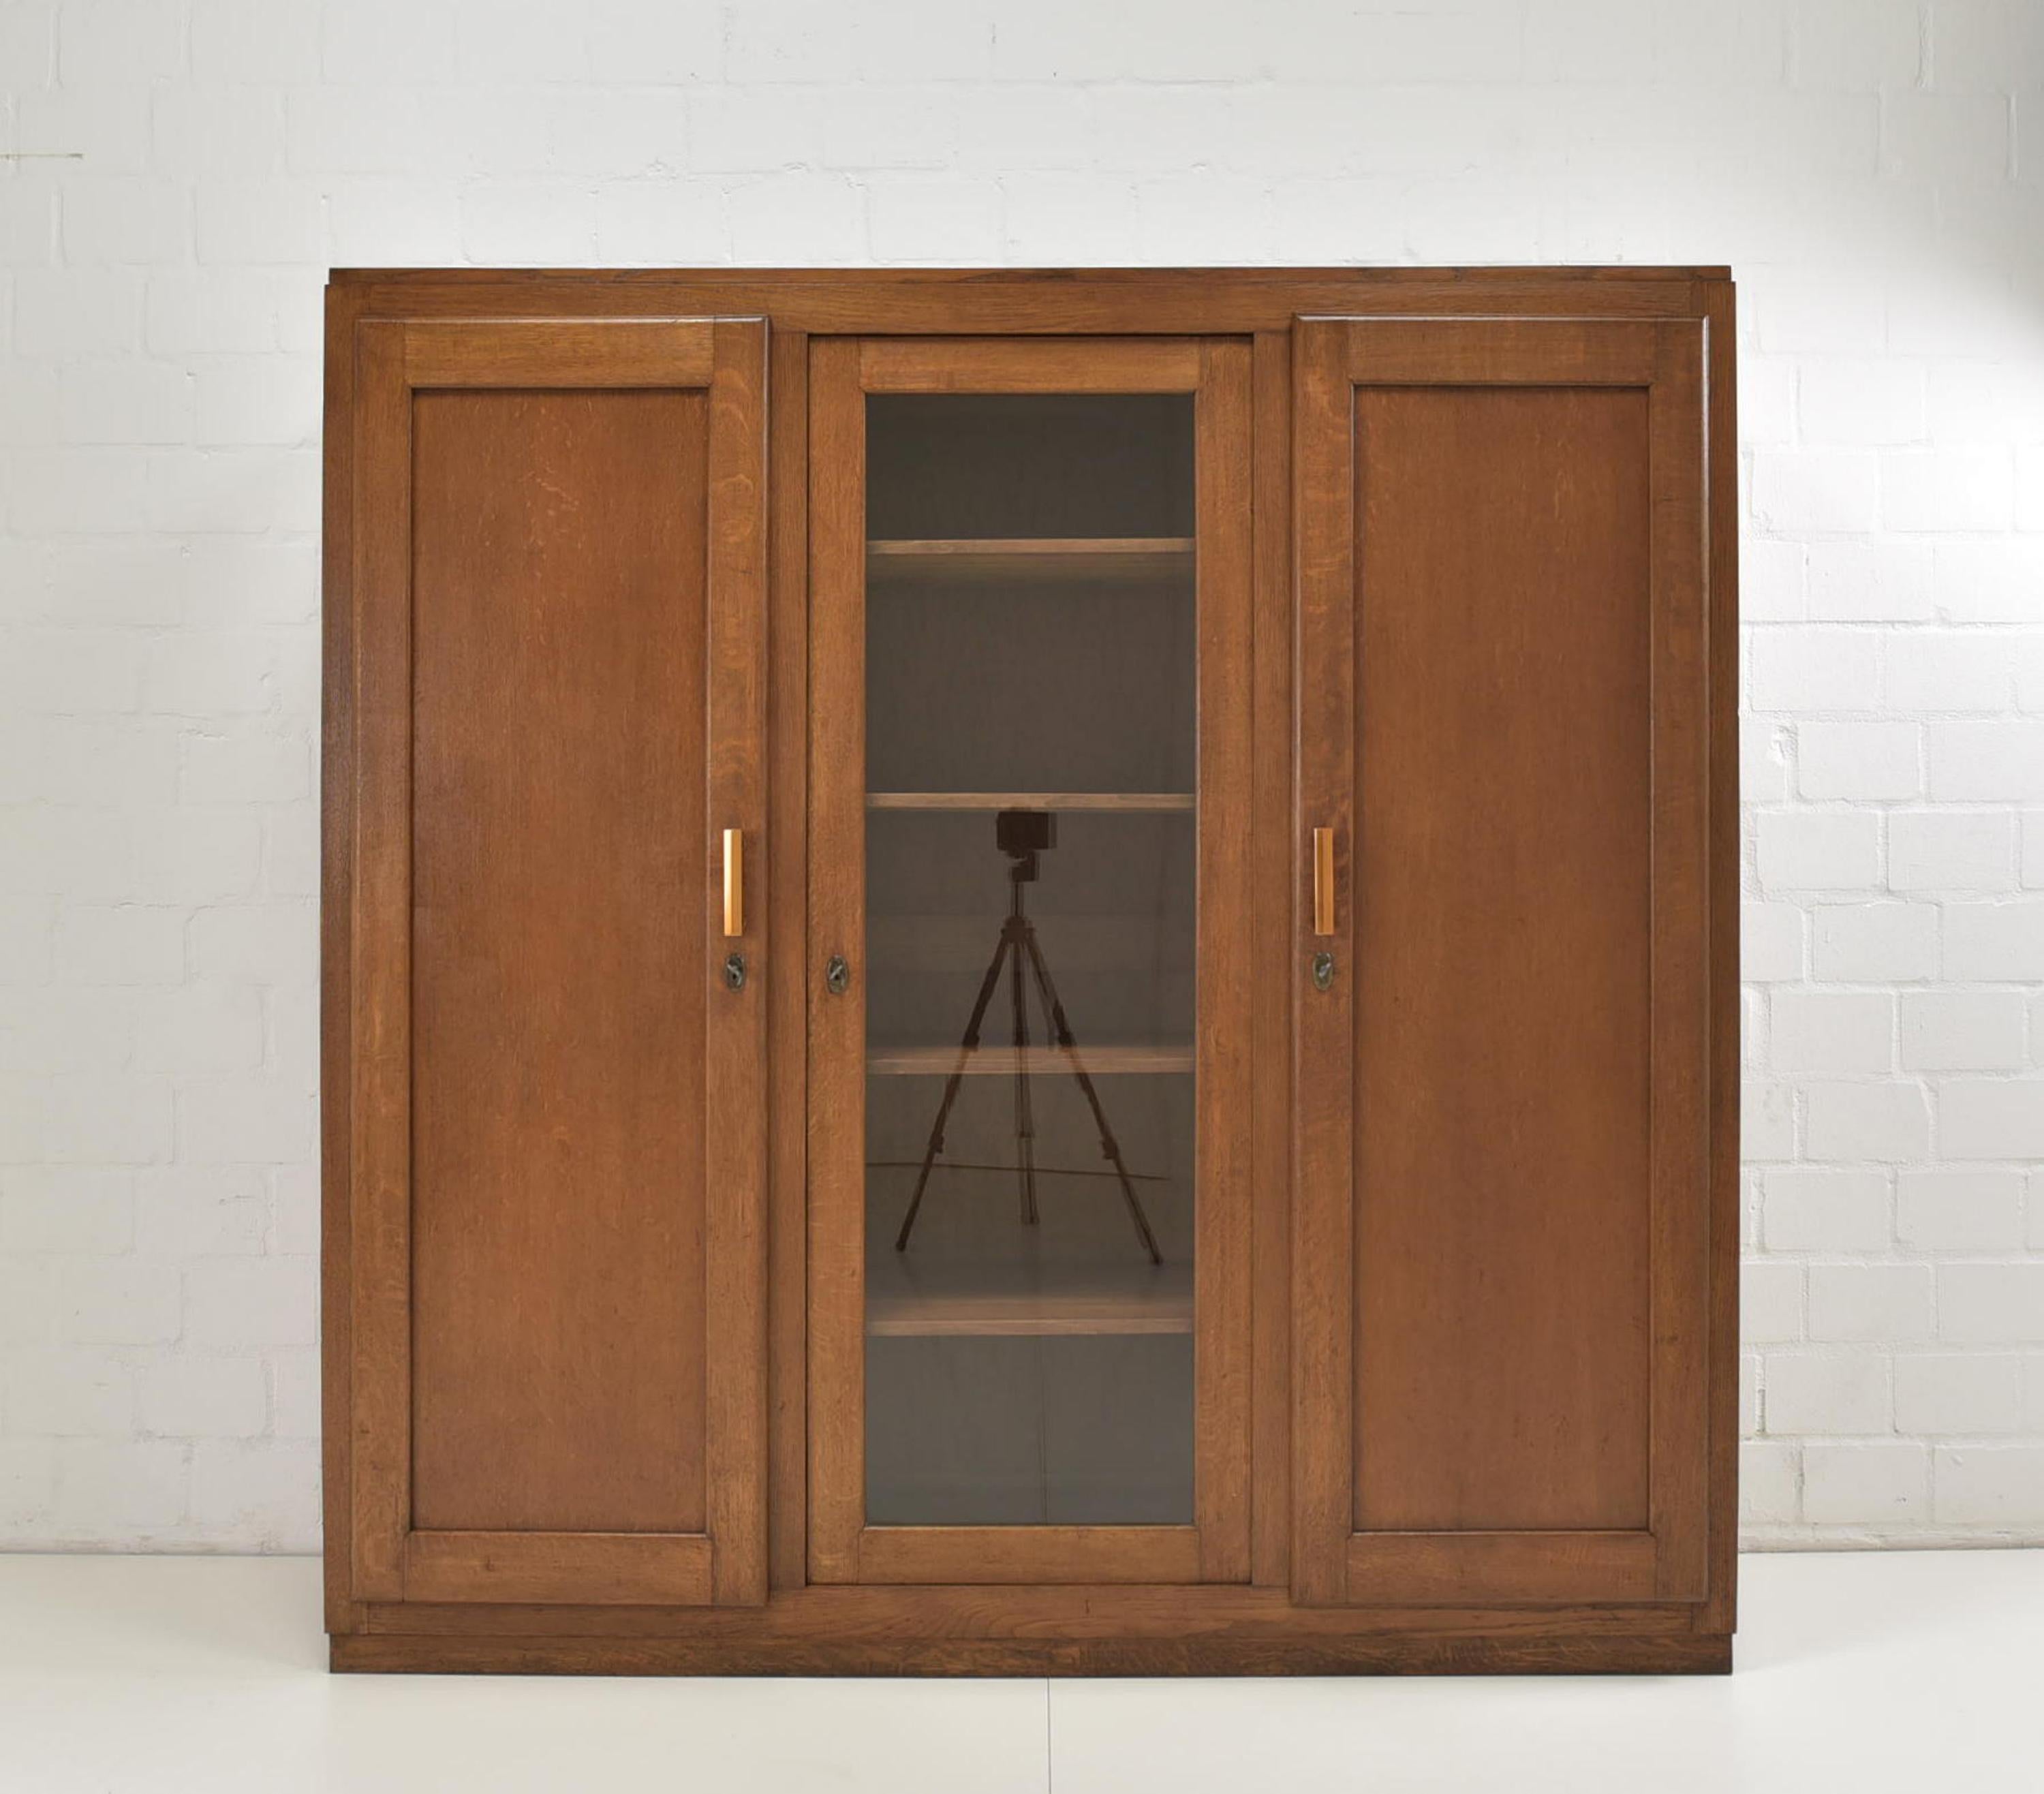 Bookcase restored Art Deco Bauhaus around 1935 oak display cabinet

Features:
Partly solid oak
Three-door model with 10 shelves
Geometric shape
Timeless, functional design
The cabinet can not be dismantled

Additional information:
Material: Partly